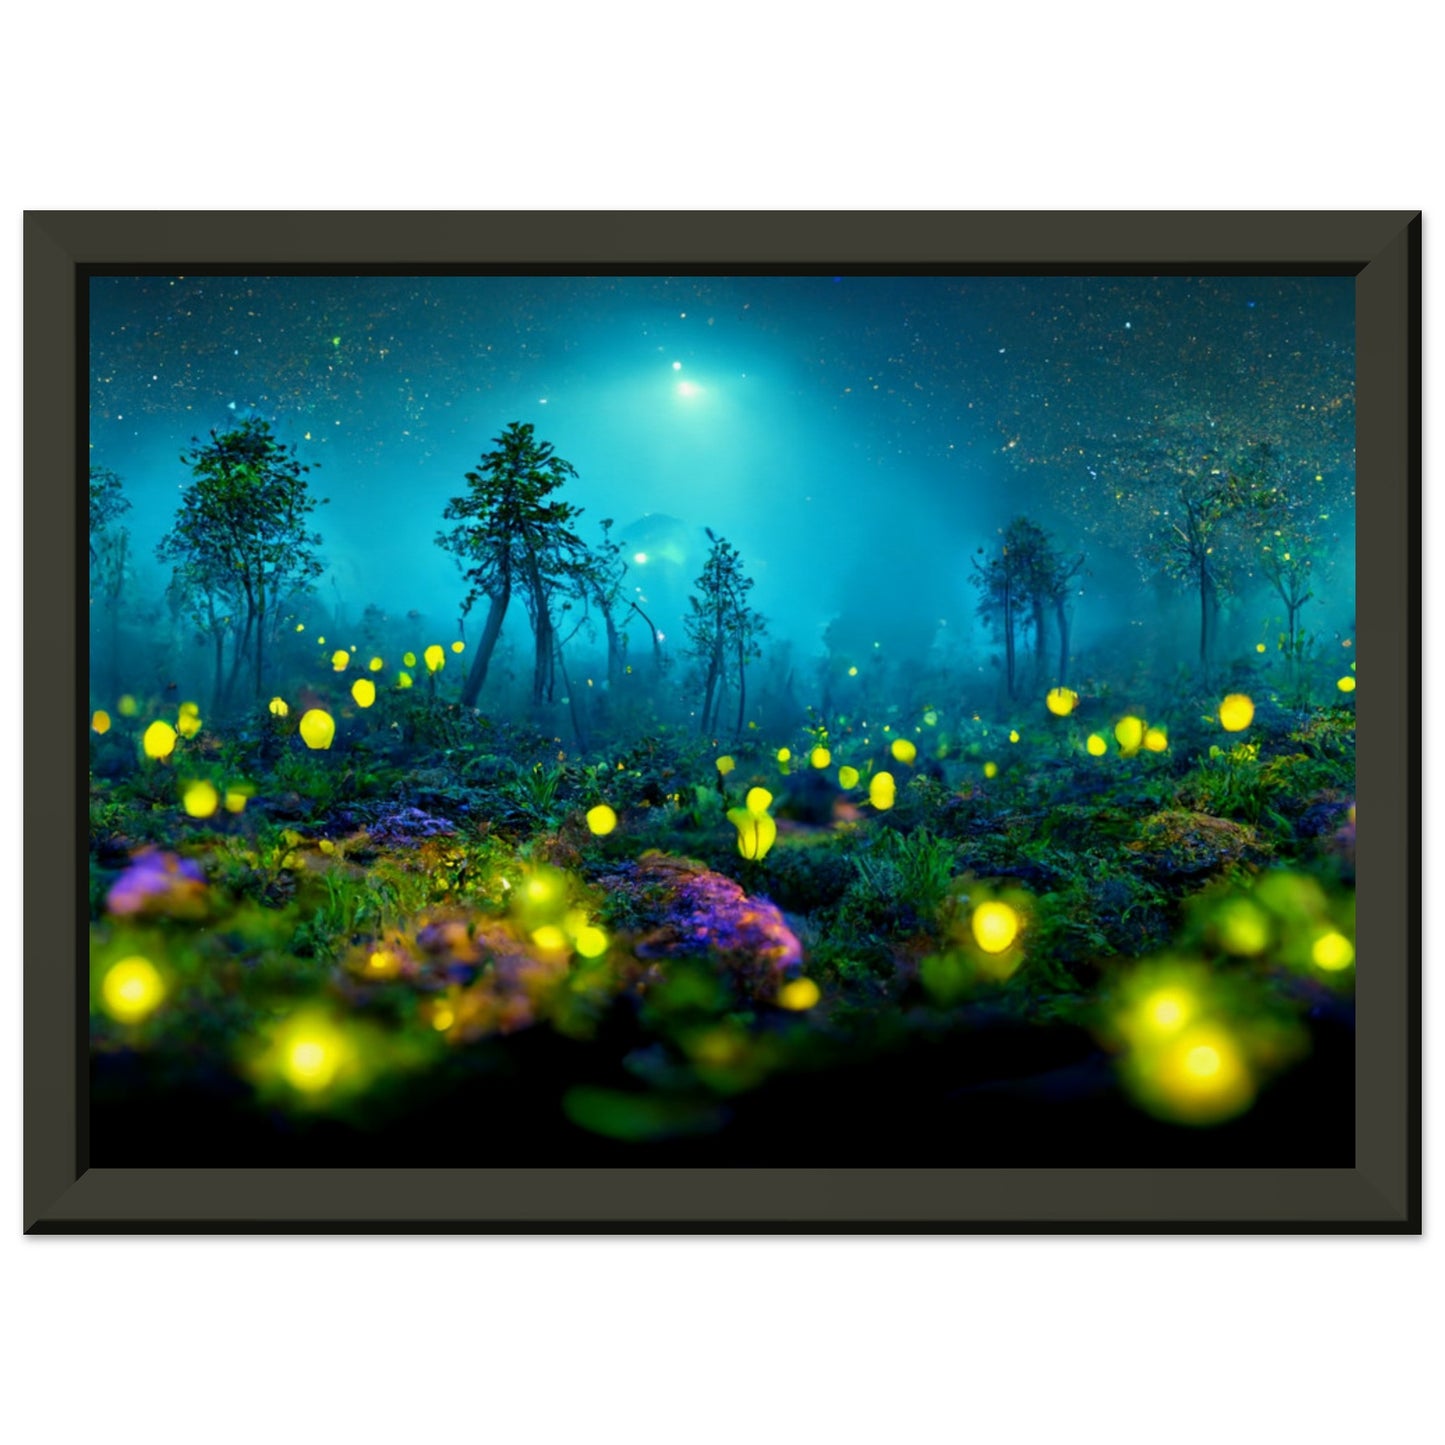 Bioluminescence in forest at night